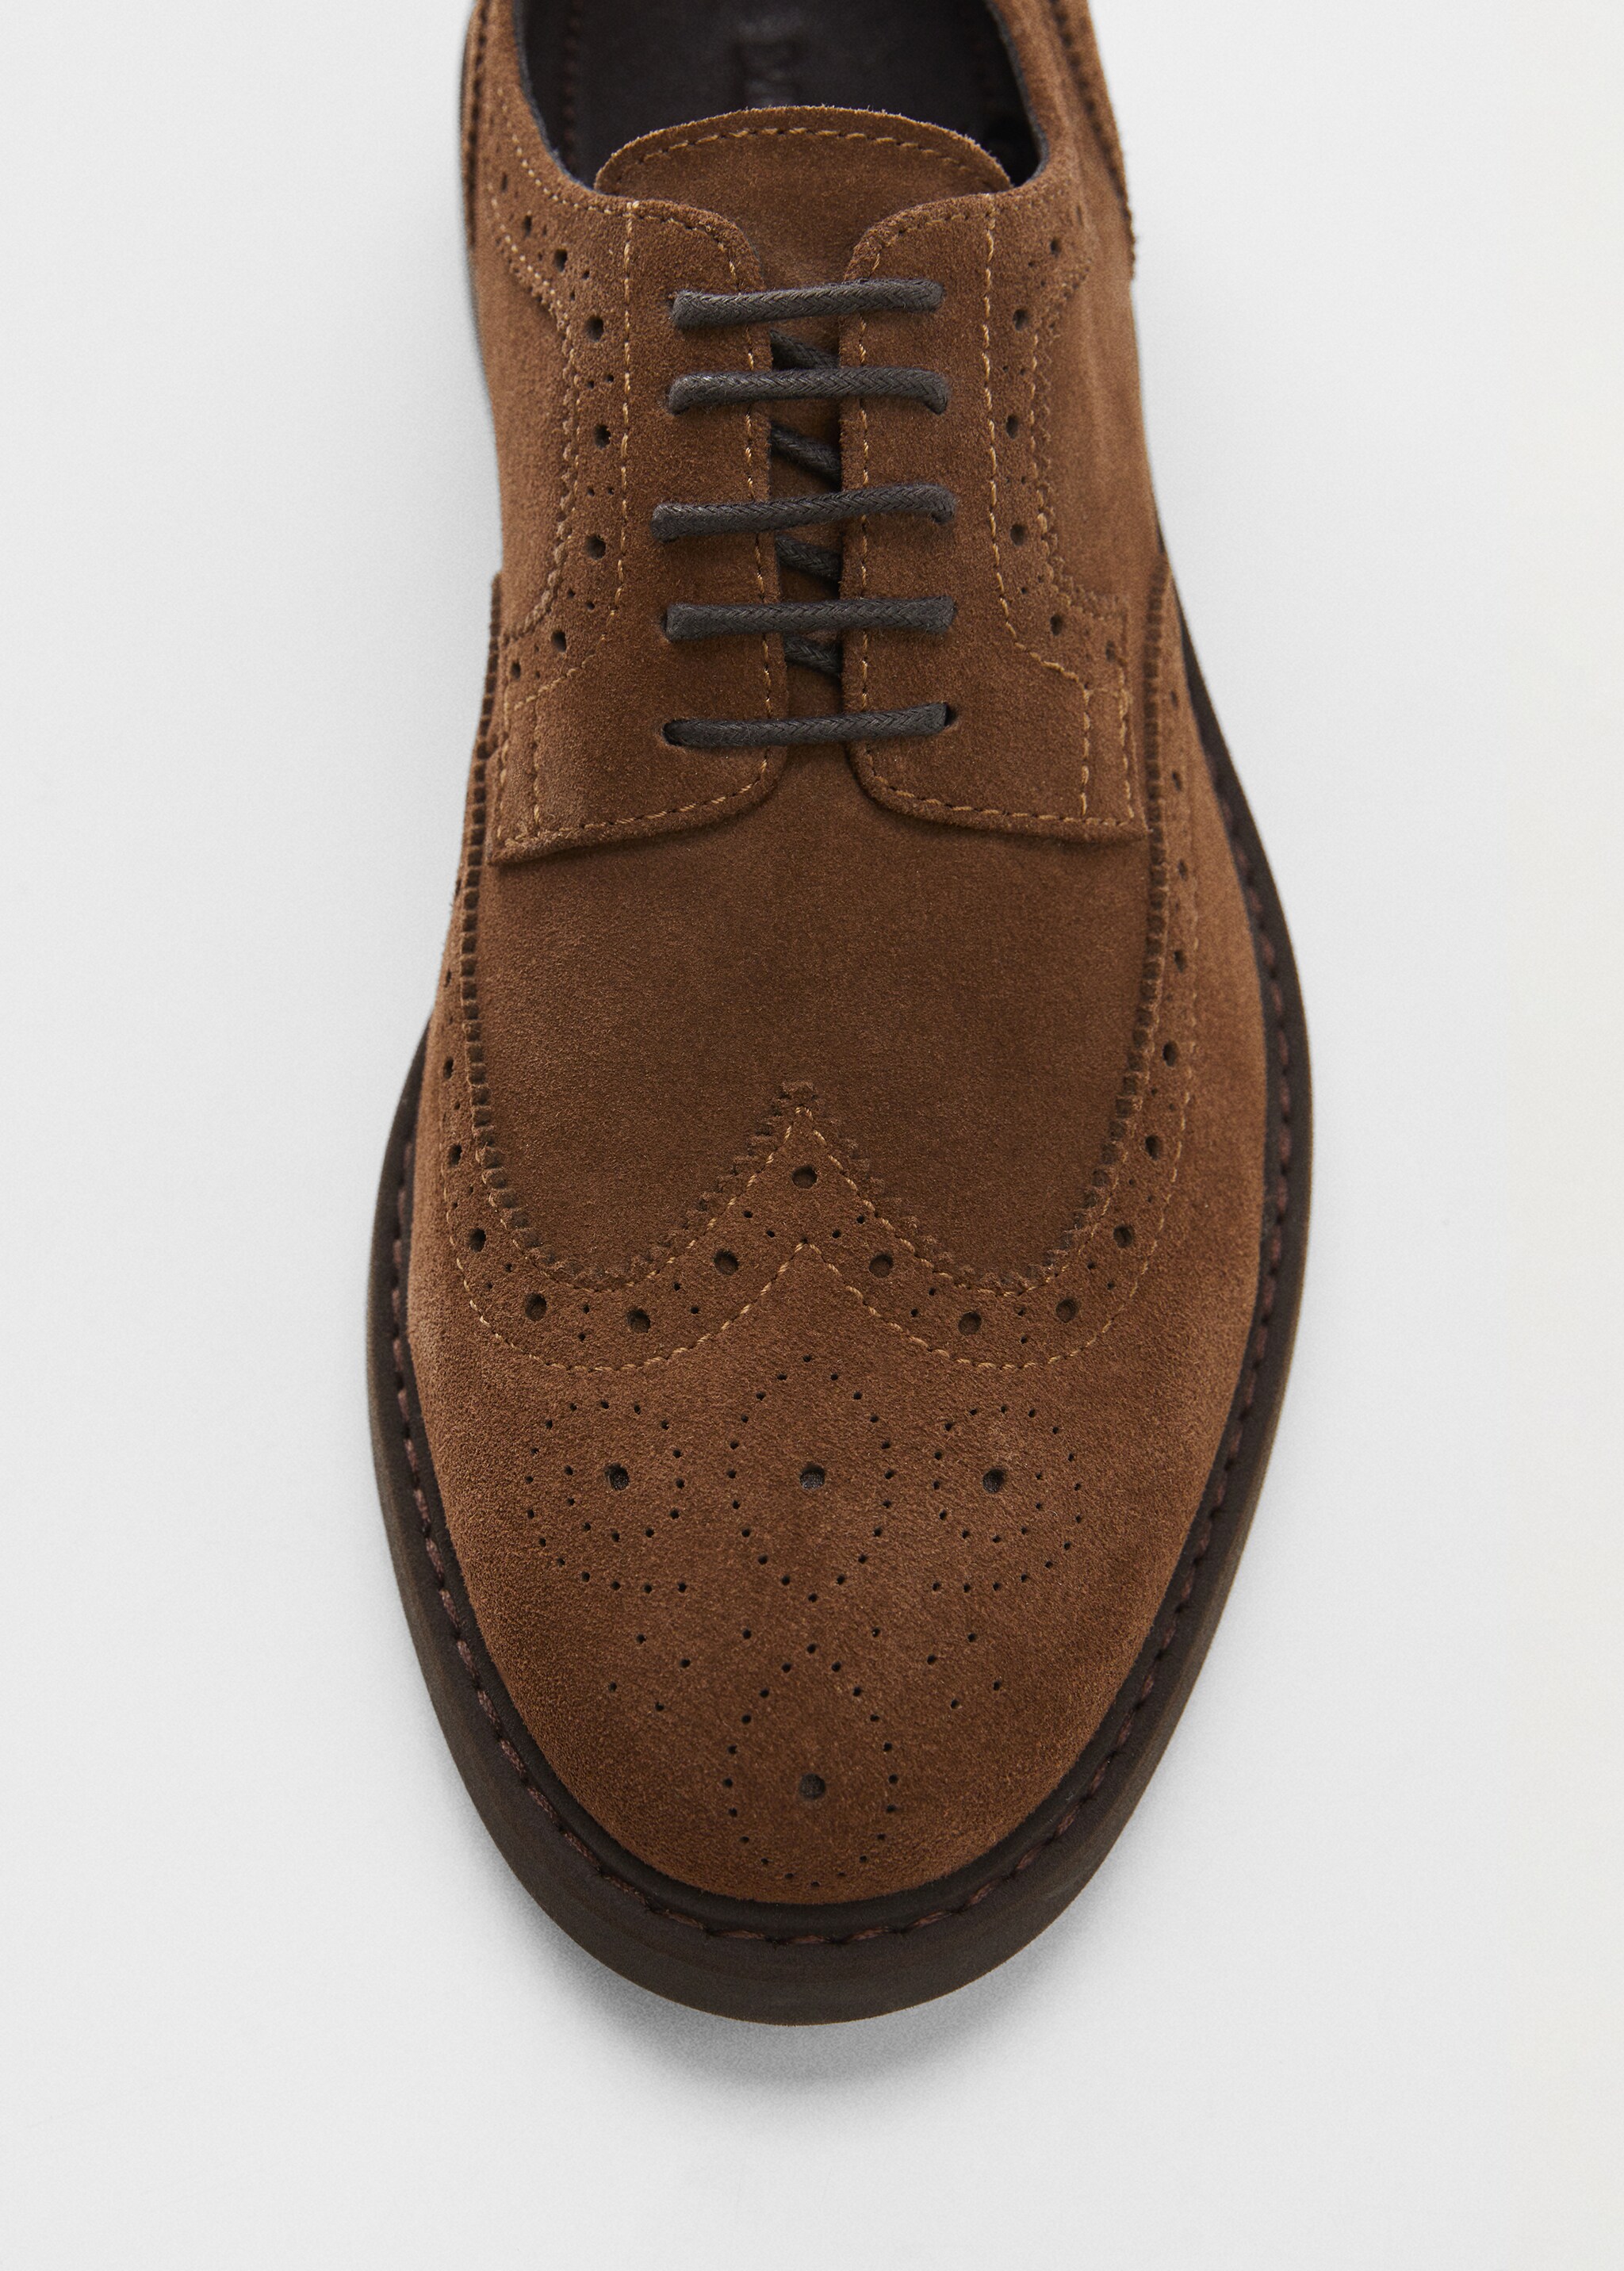 Die-cut suede blucher shoes - Details of the article 2